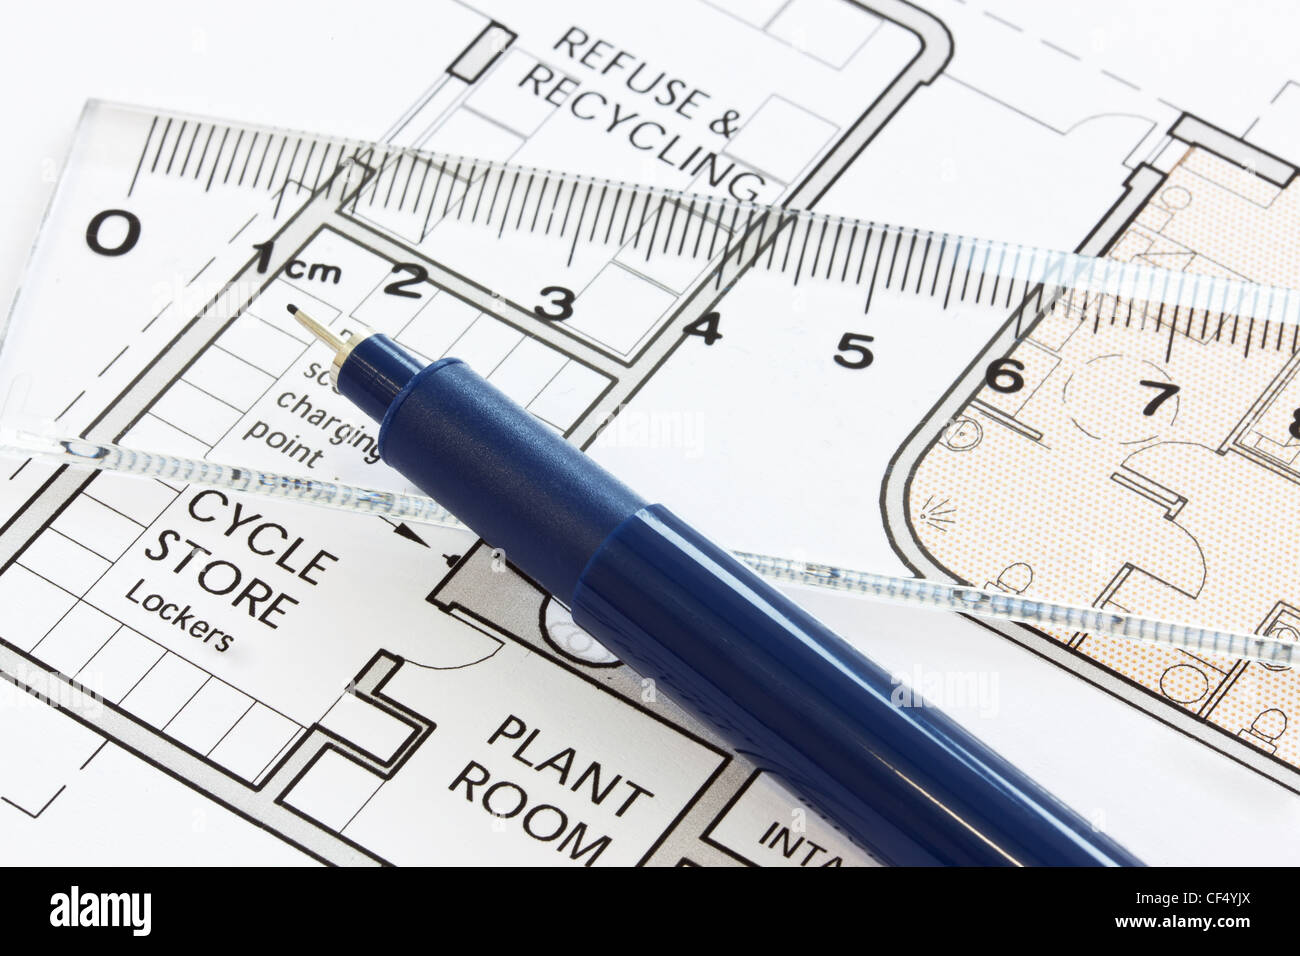 Still life photo of an exterior site drawing with pen and ruler Stock Photo